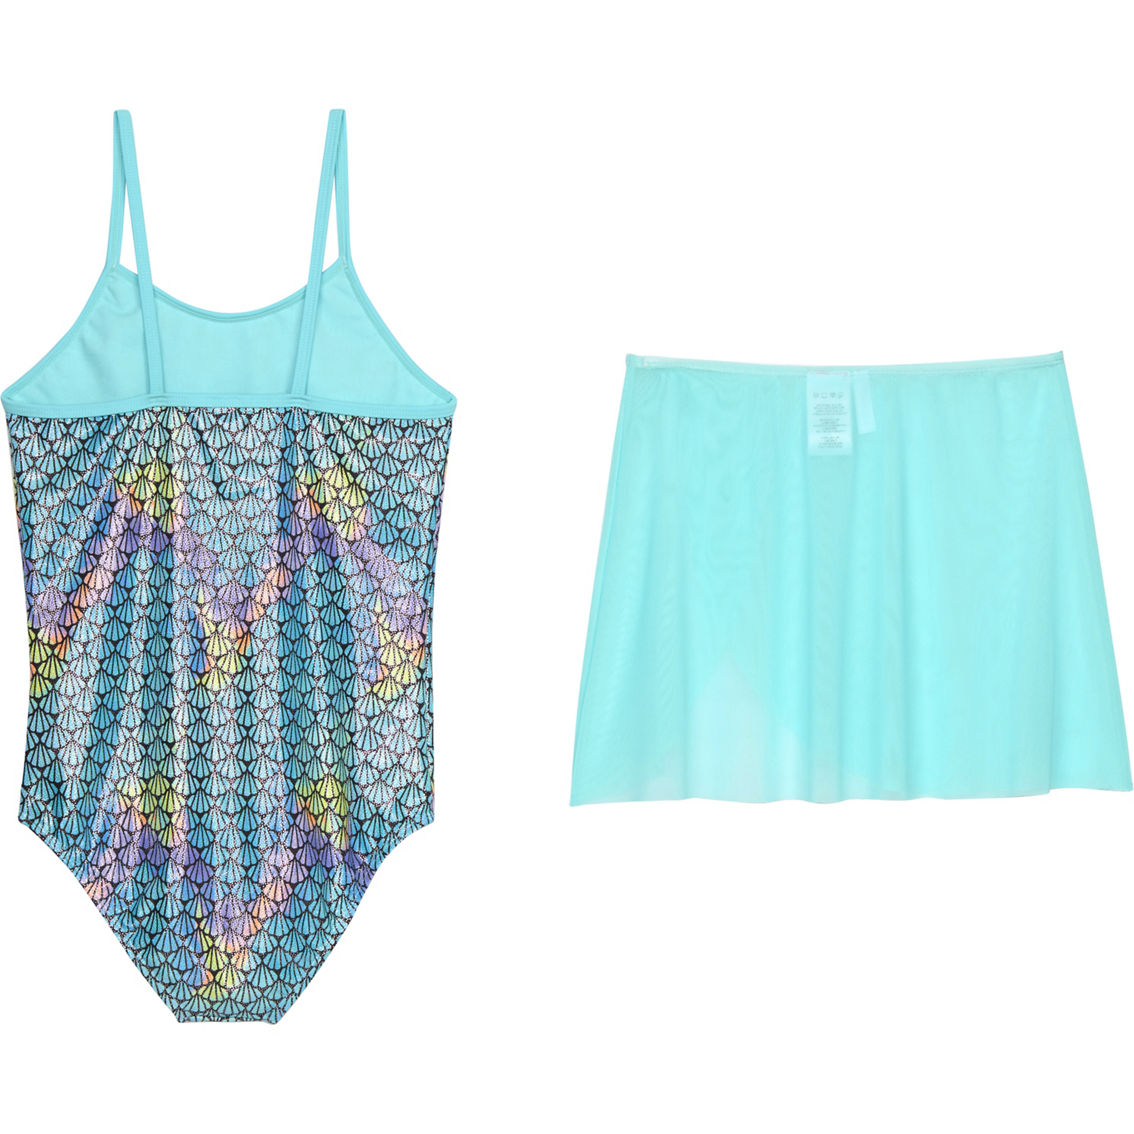 Limited Too Girls Mermaid Shell Foil One-Piece and Mesh Skirt 2 pc. Swim Set - Image 2 of 2